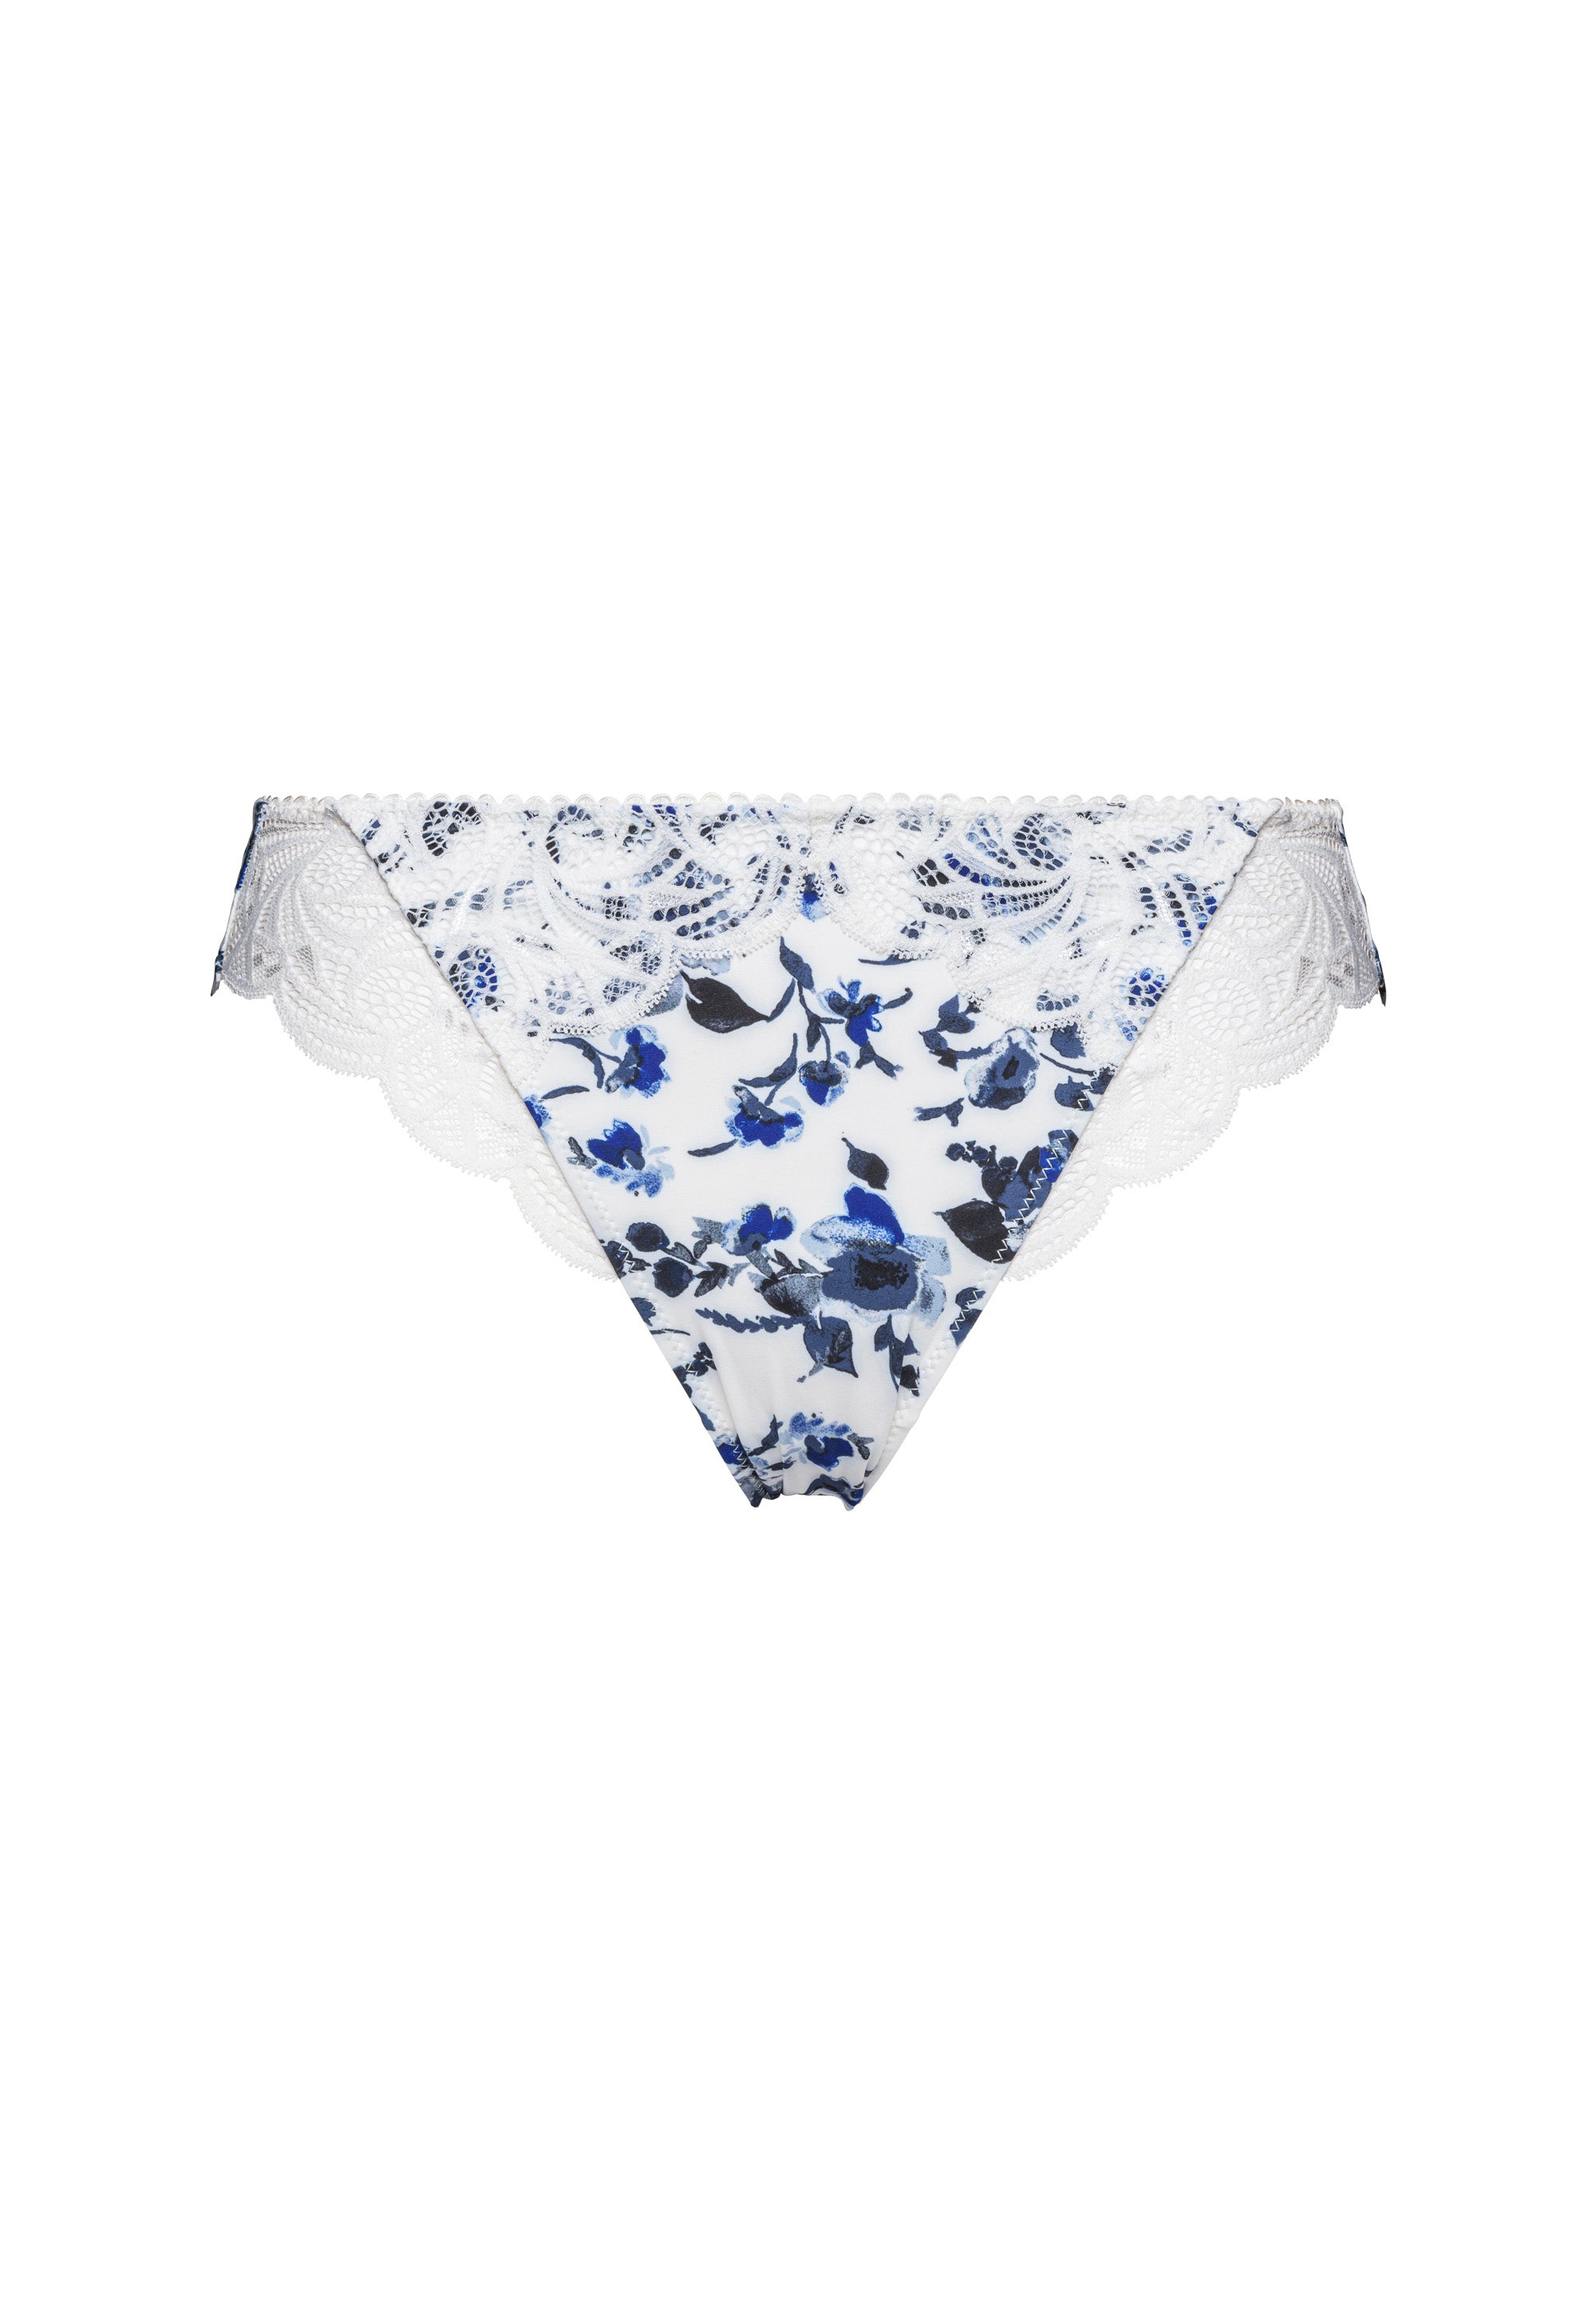 Brief Ariane Fantaisy Printed Ivory Floral